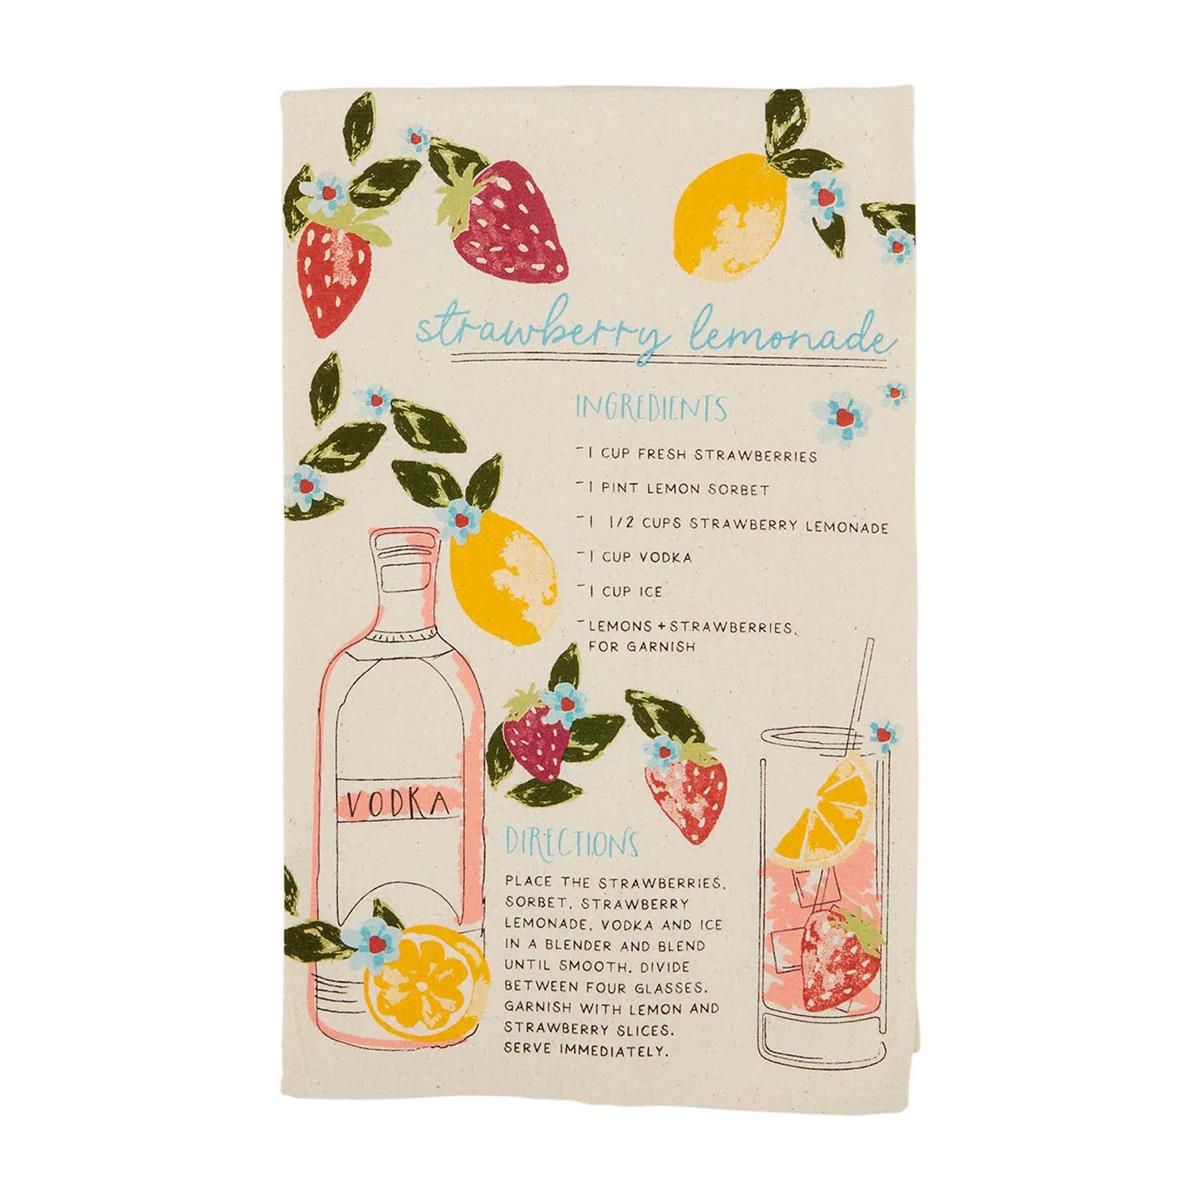 lemonade drink recipe towel has drawings of strawberries, lemons, bottle of vodka and a recipe on a white background